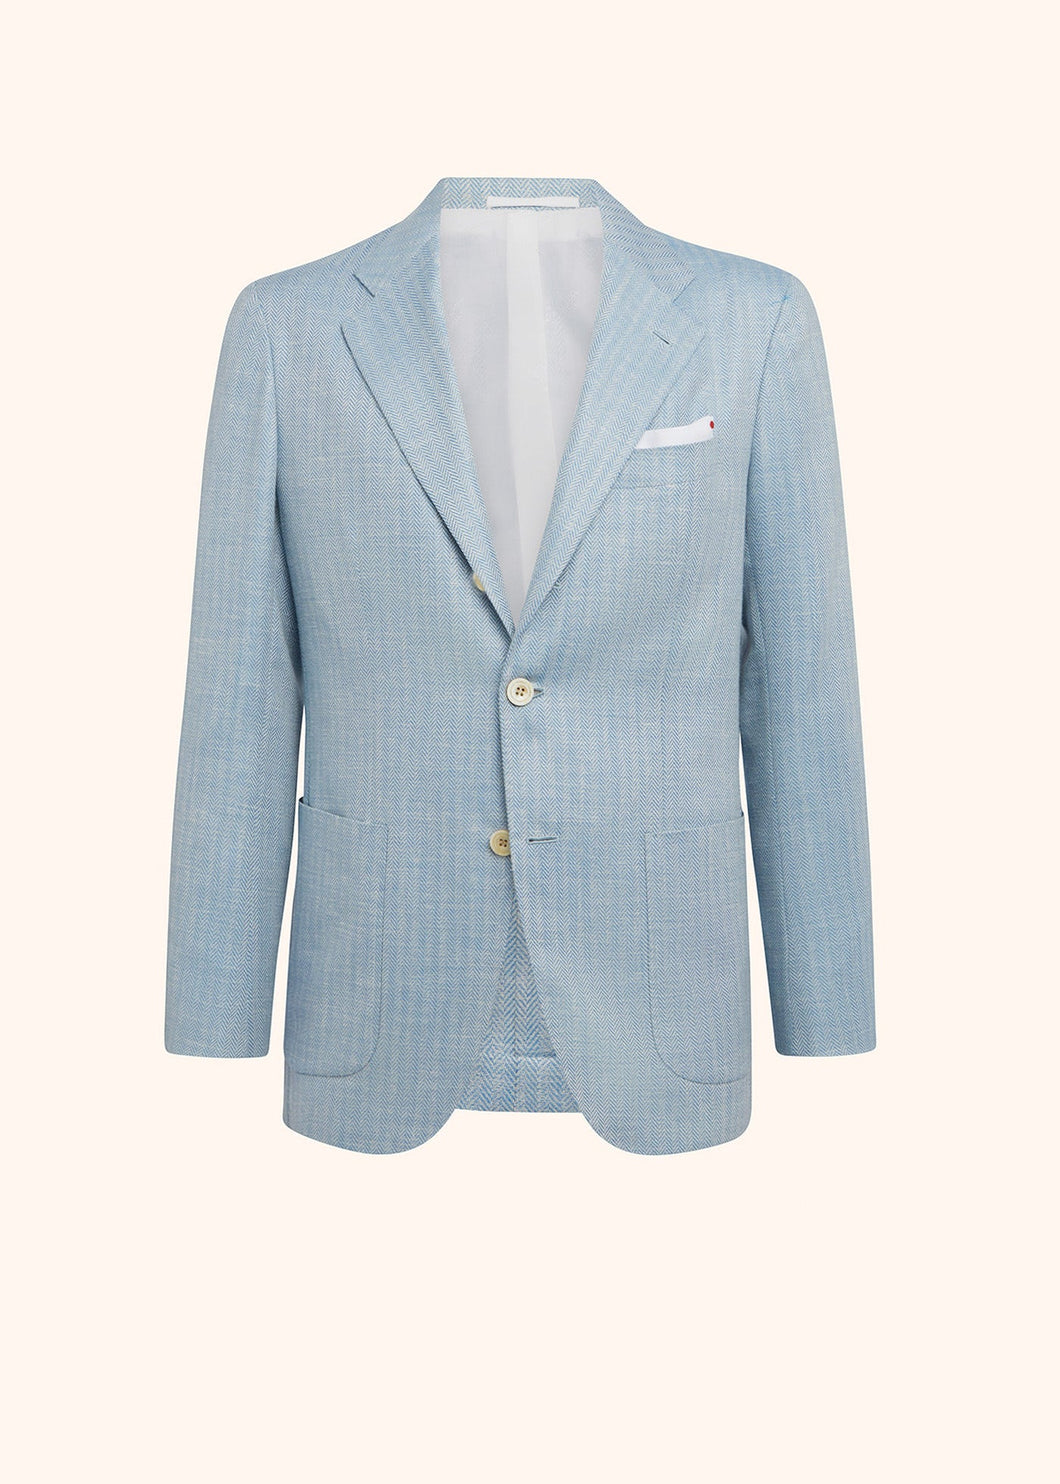 Kiton sky blue single-breasted jacket for man, made of virgin wool